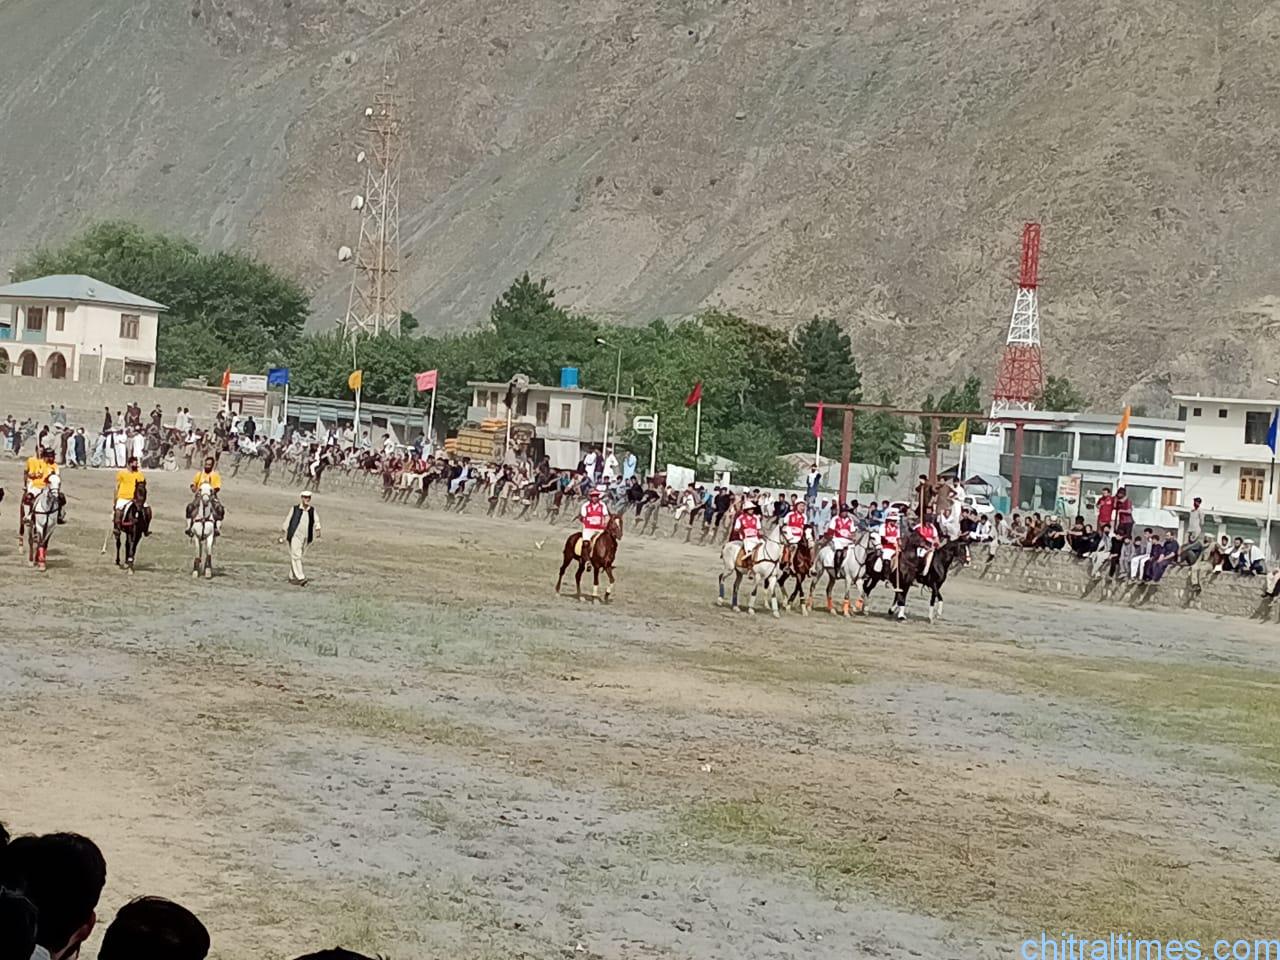 chitraltimes district cup polo tournament kicked off here in Chitral 1